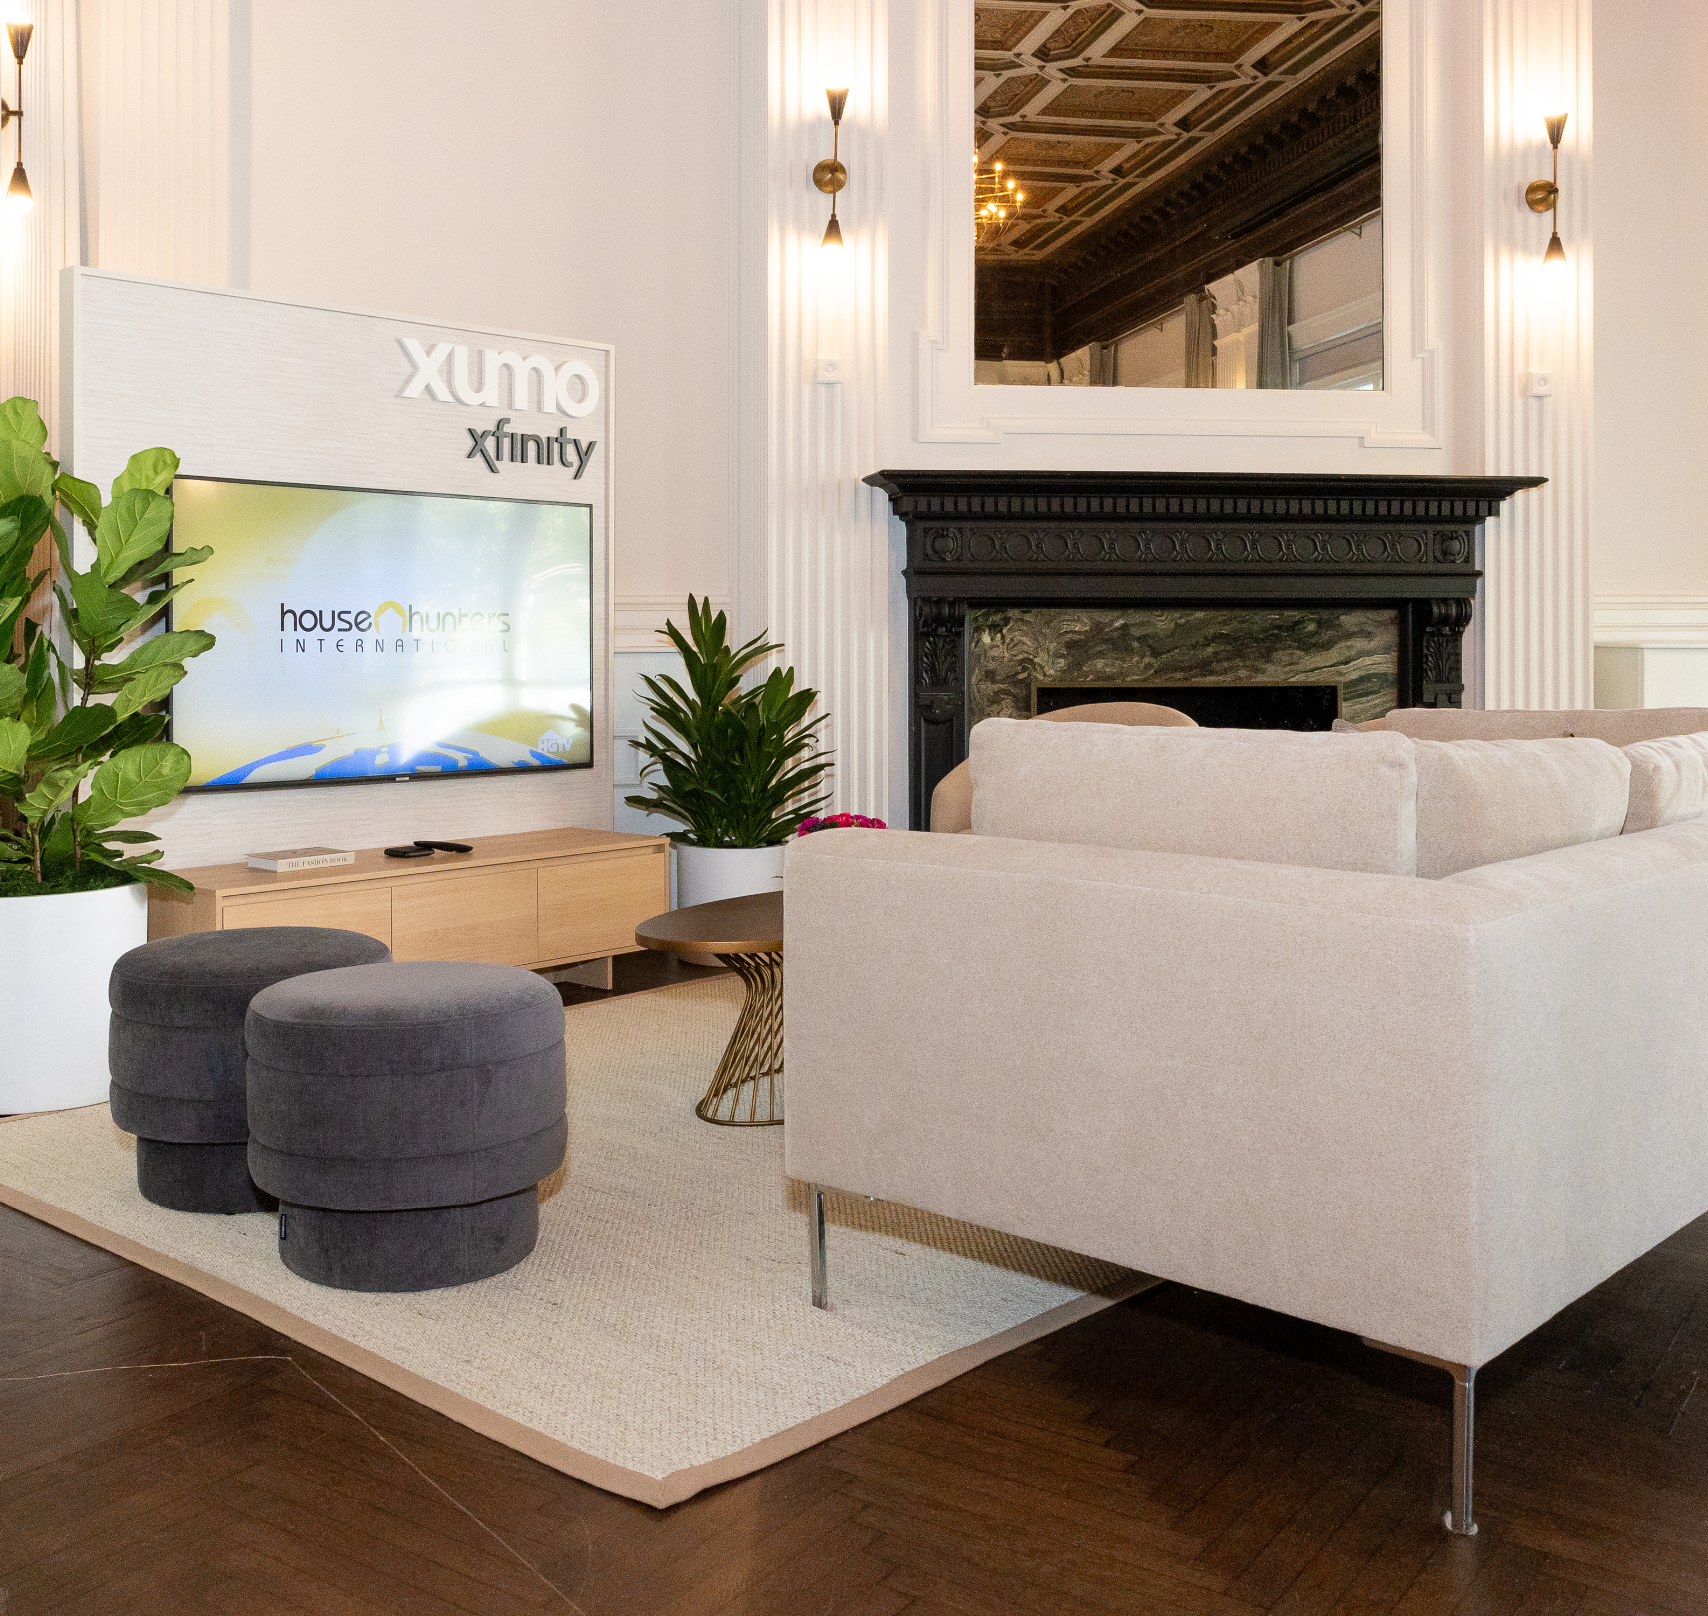 a living room with a xfinity sign on the wall